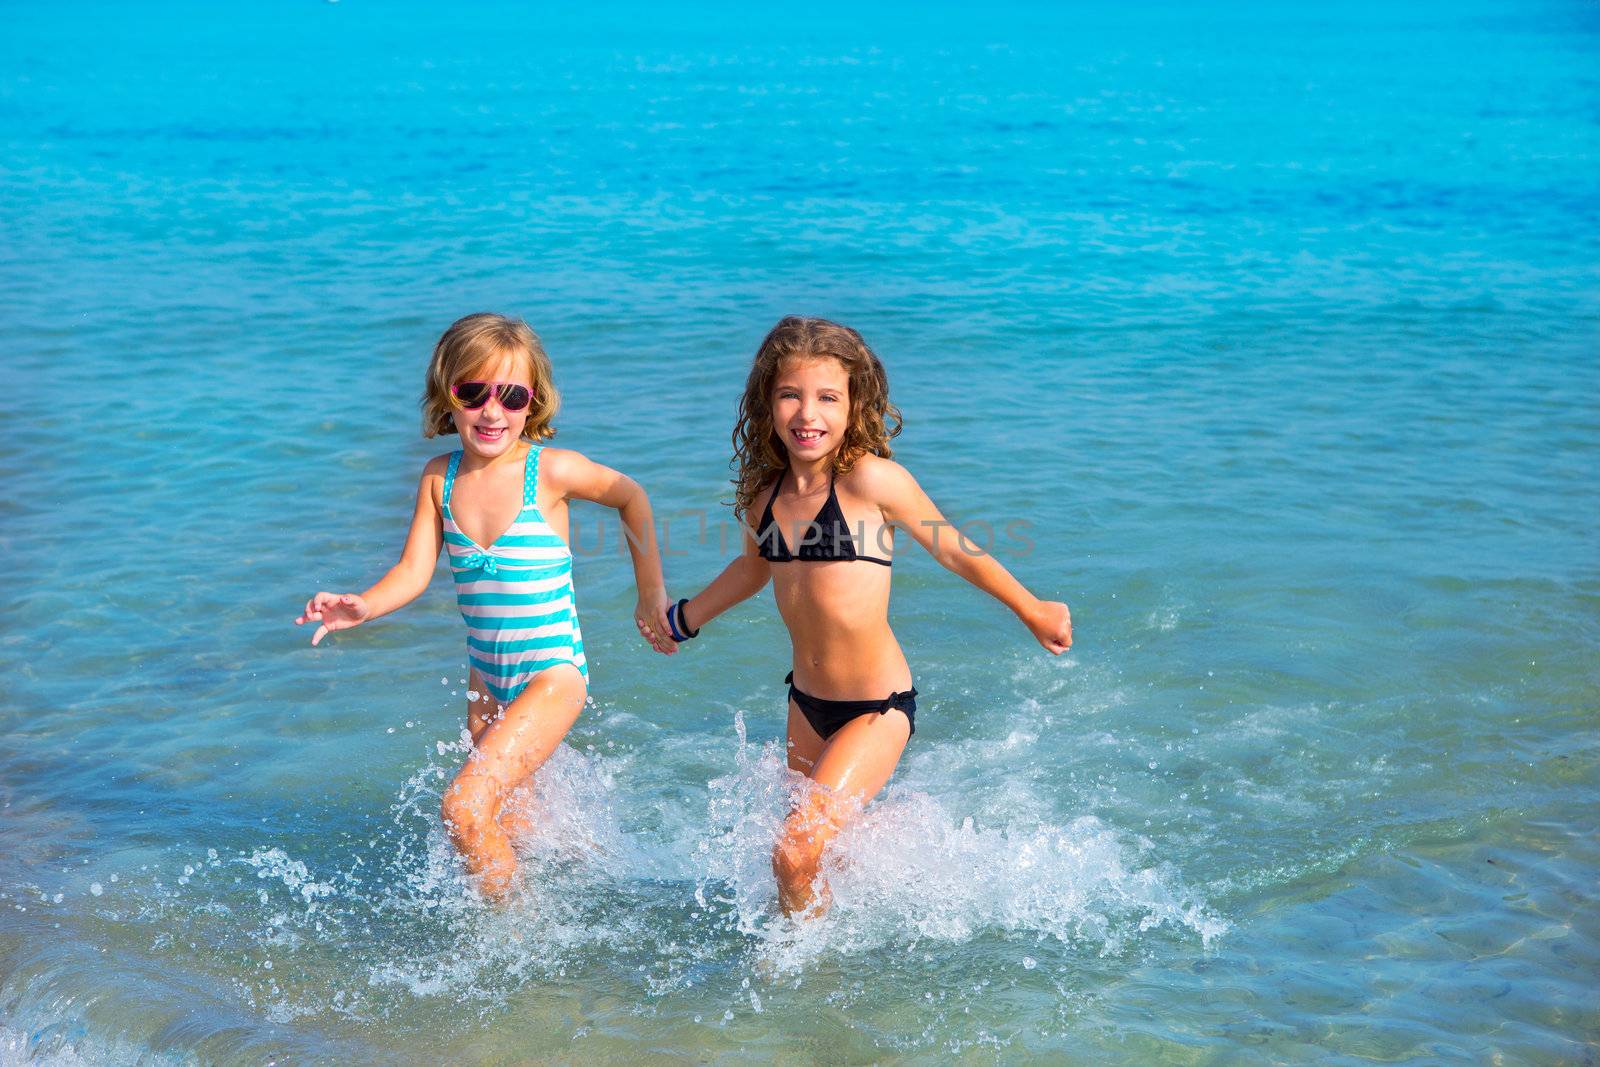 children girls friends running together in the beach shore on summer vacation